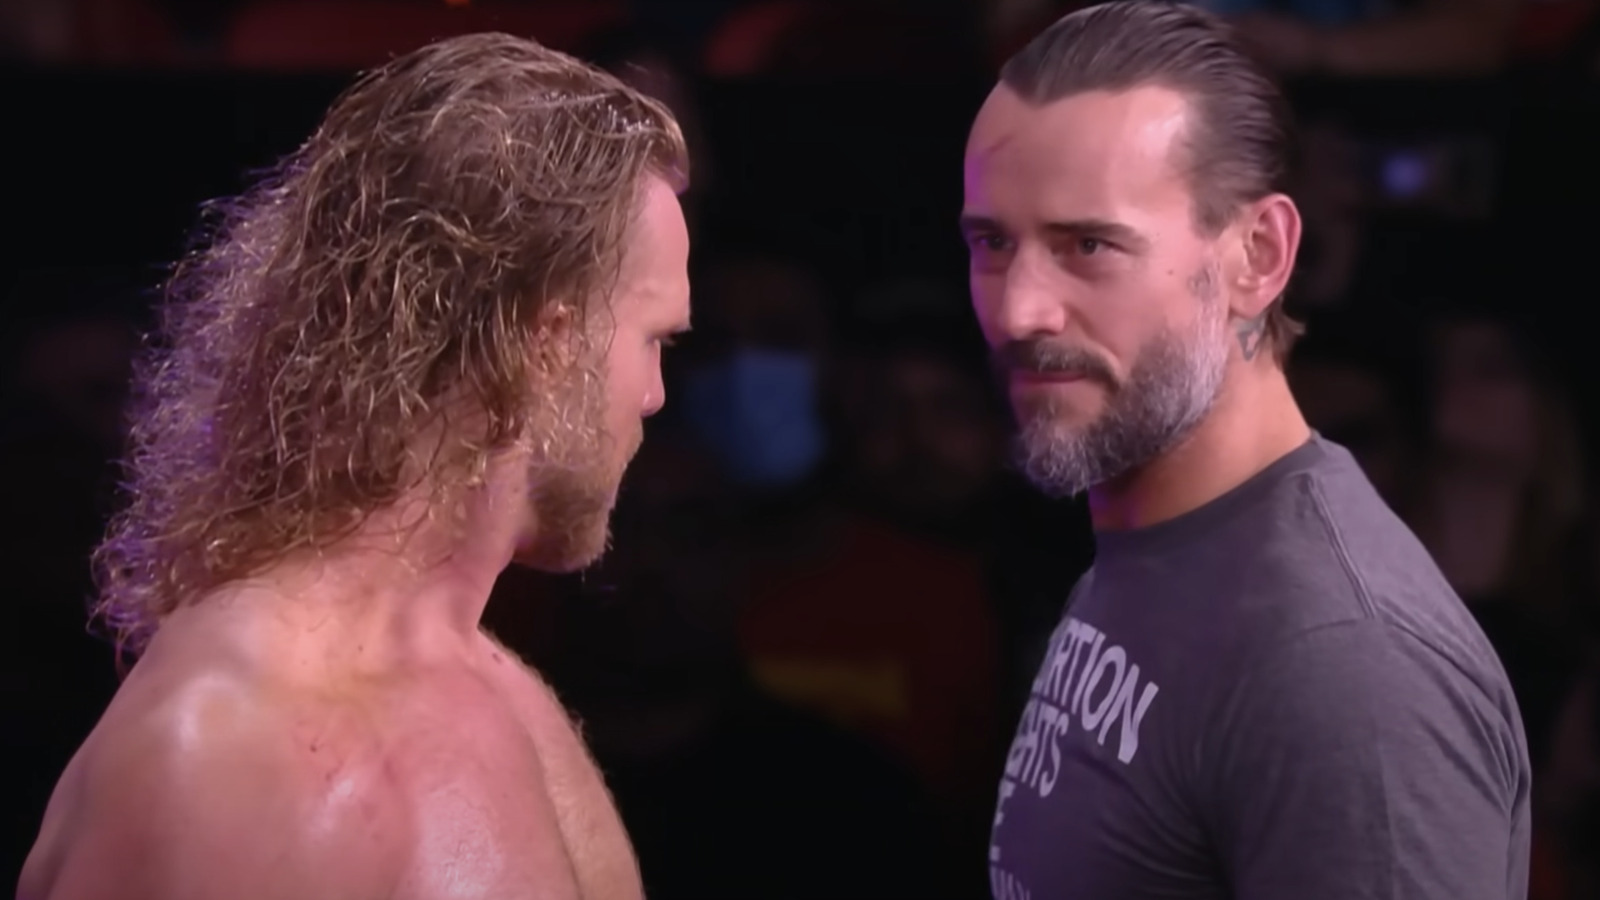 Bully Ray Weighs In On Situation Between WWE's CM Punk & AEW's Hangman Adam Page